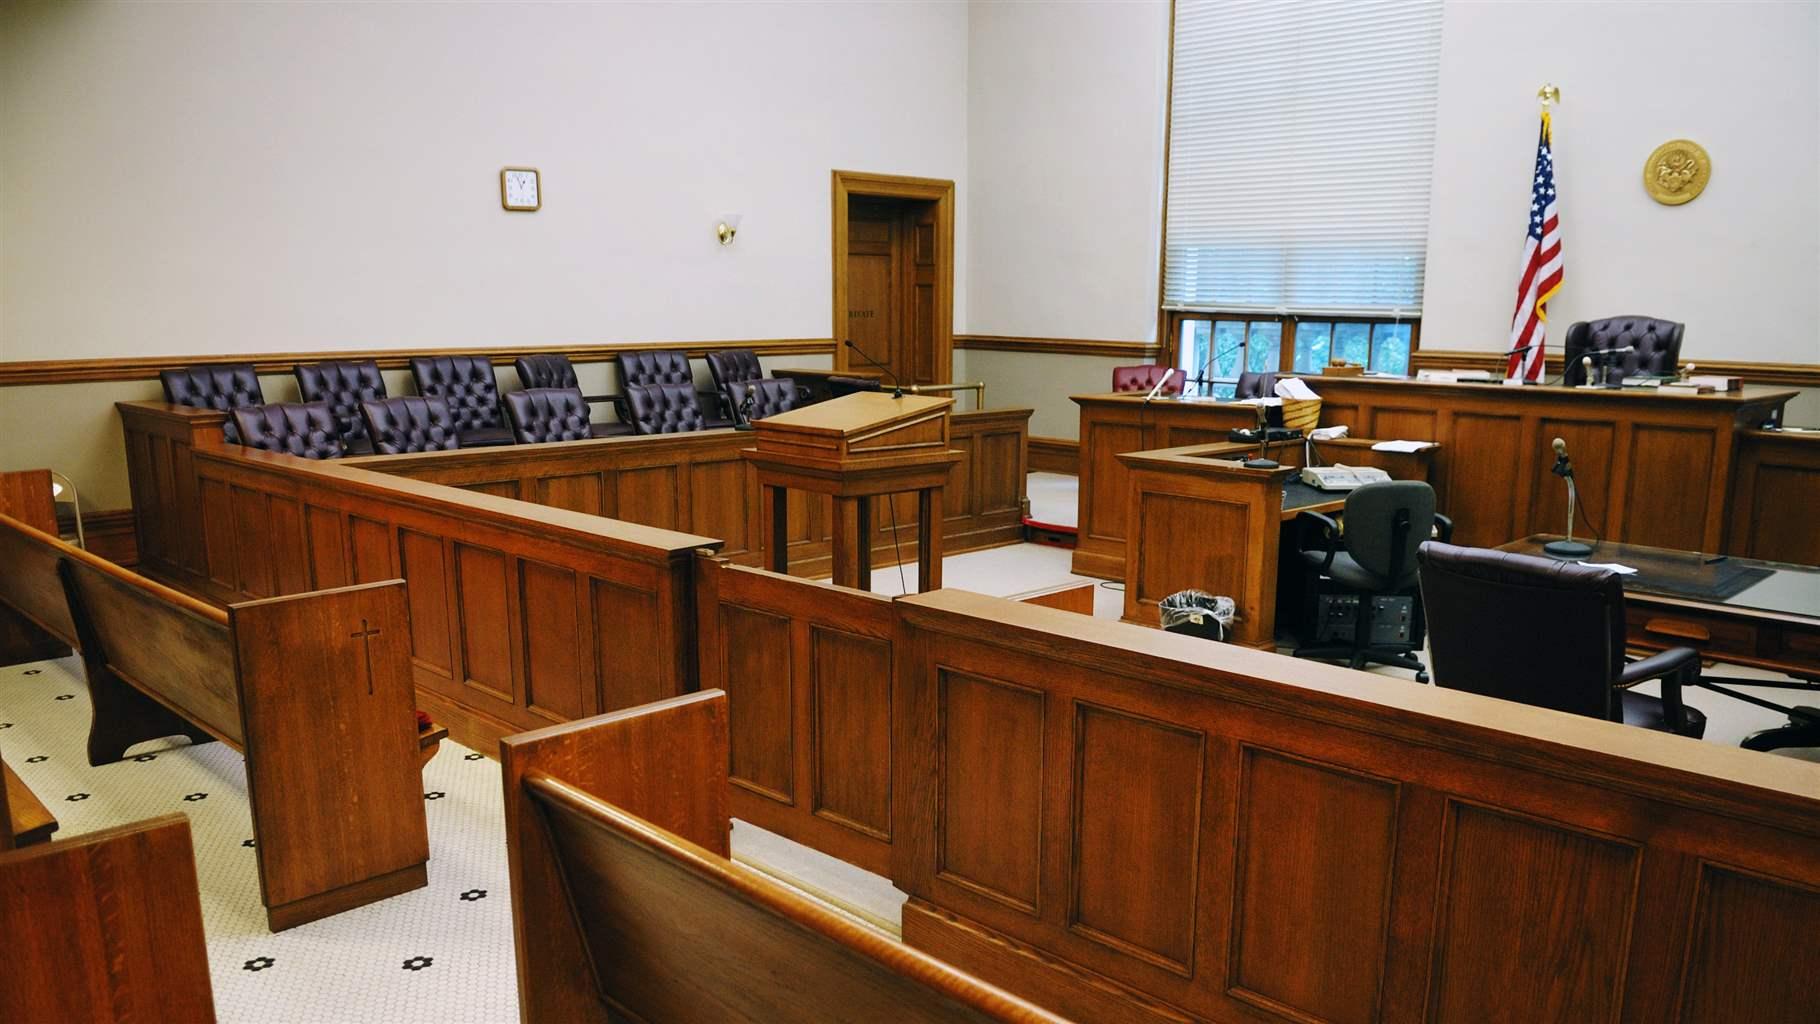 A view of an empty courtroom looking toward the judge's bench.  